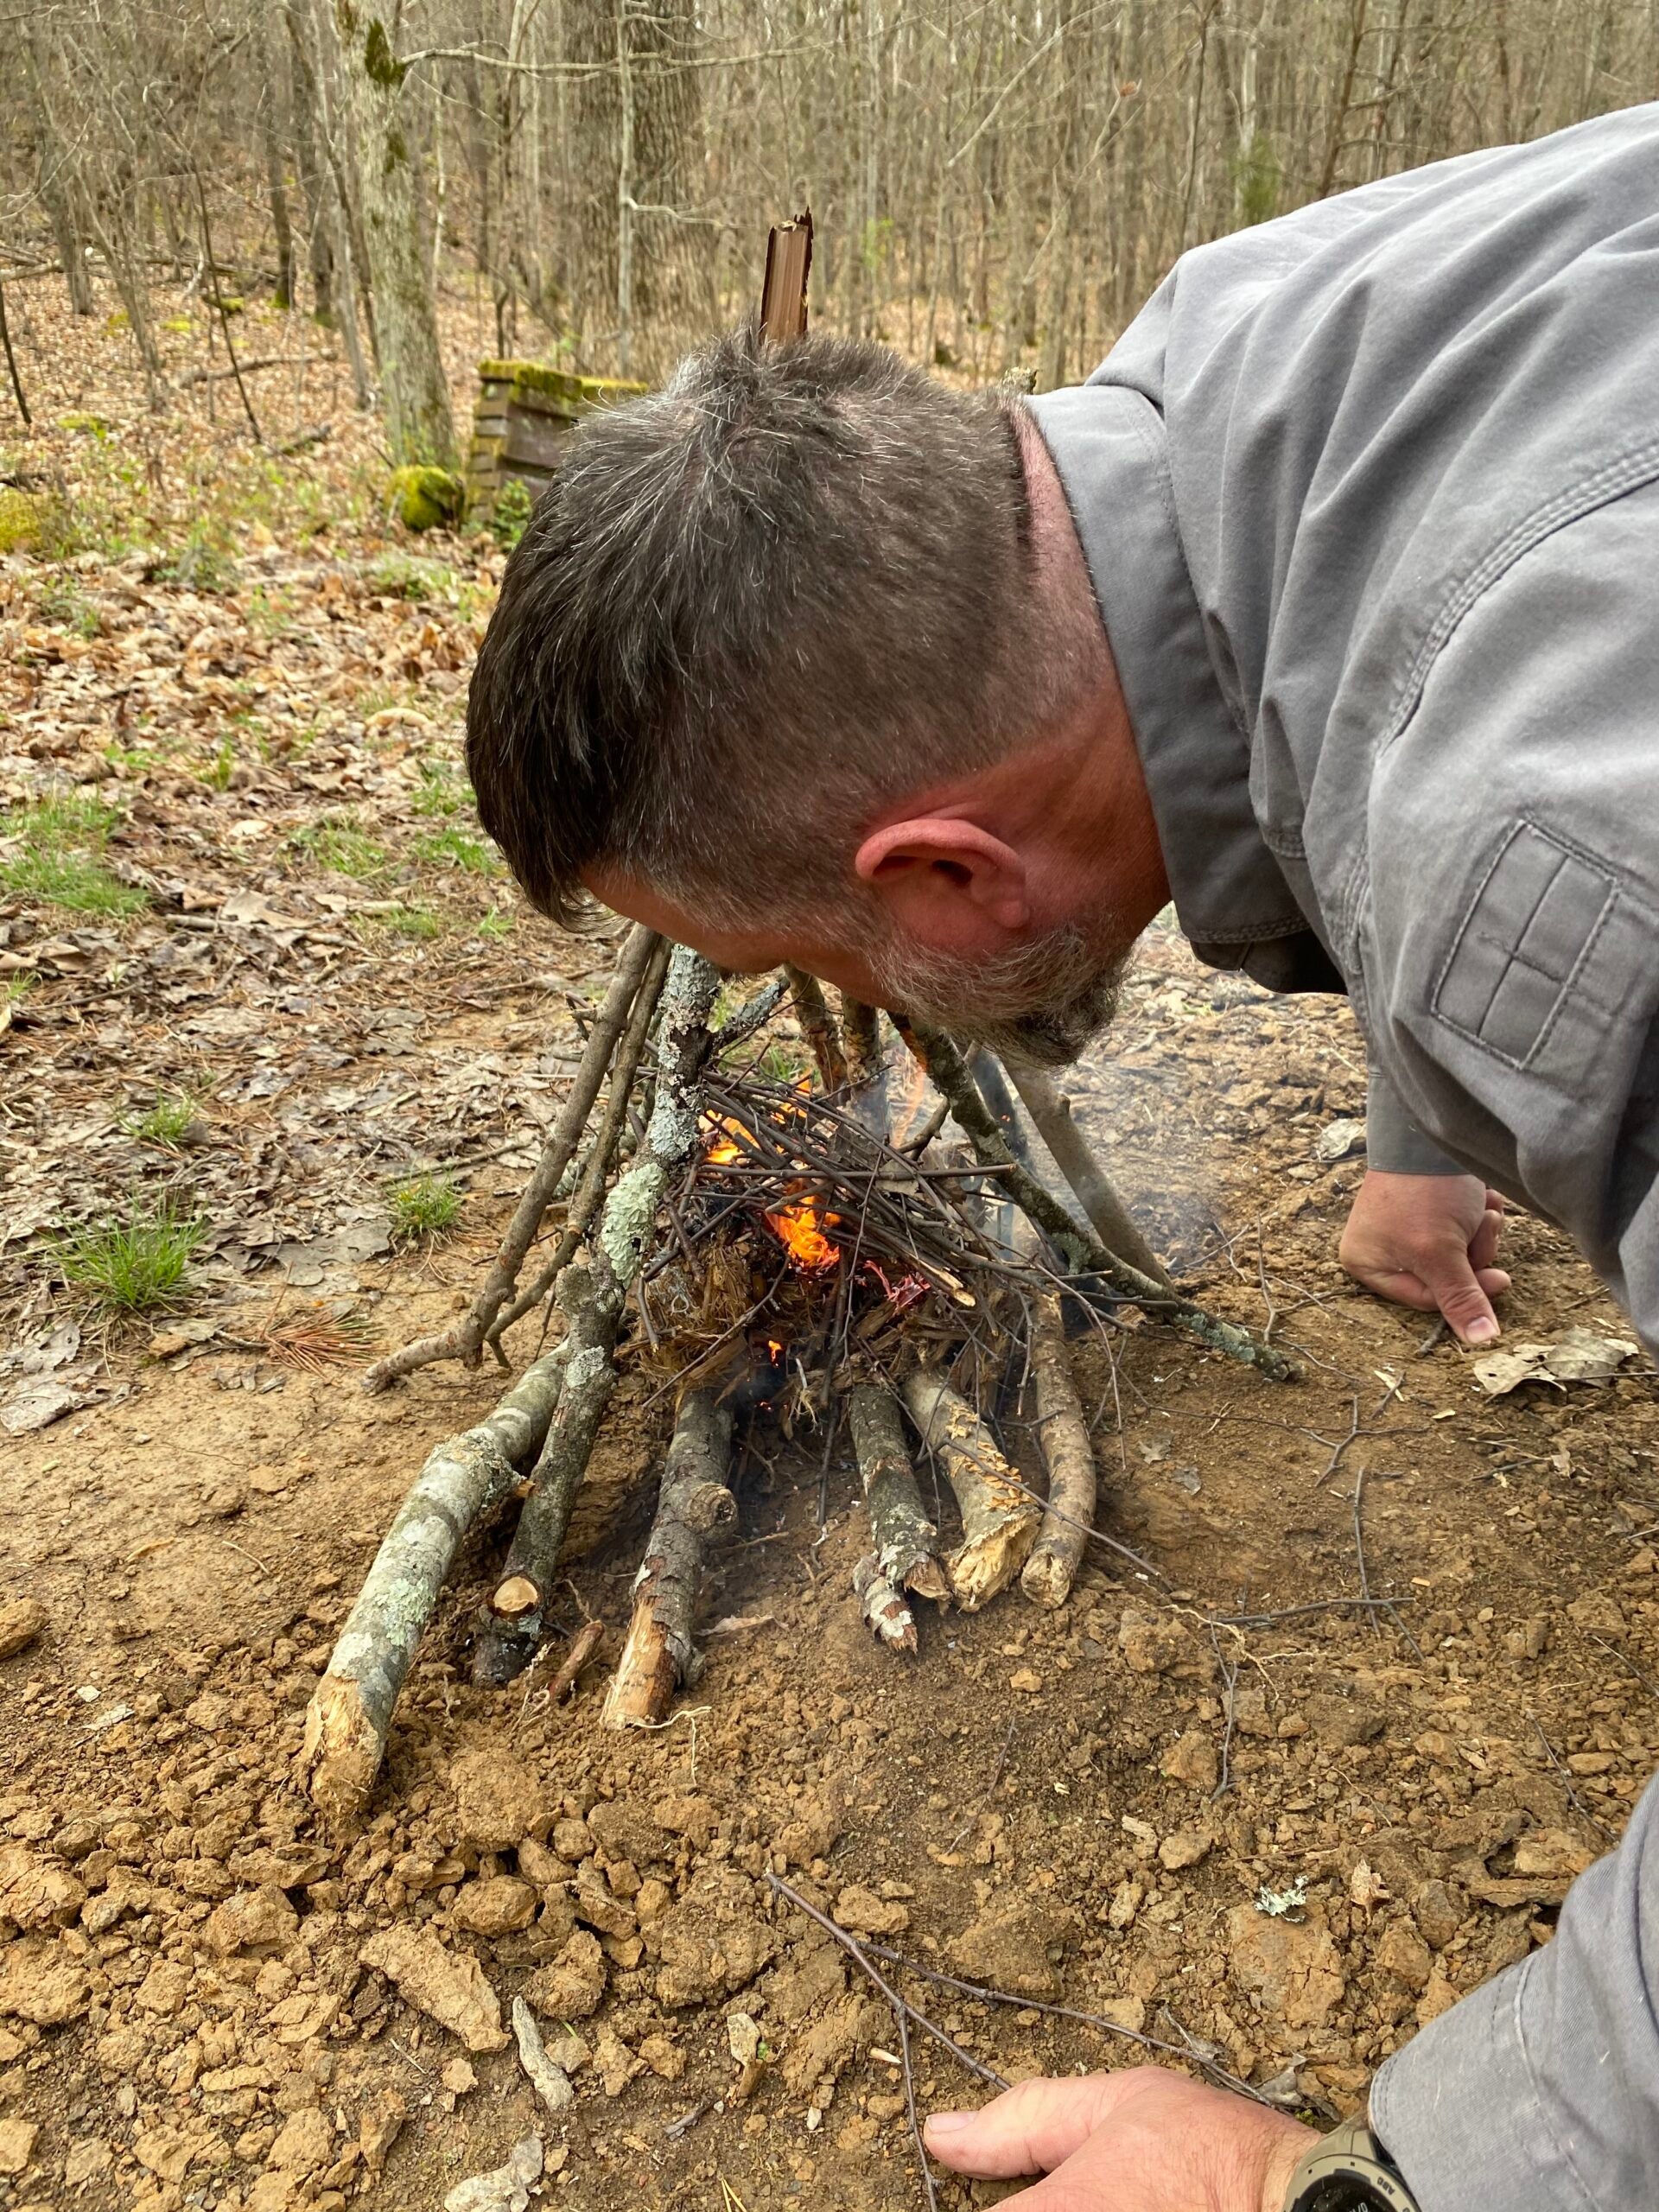 A man leans down to the ground to blow into a campfire to help the flames grow.